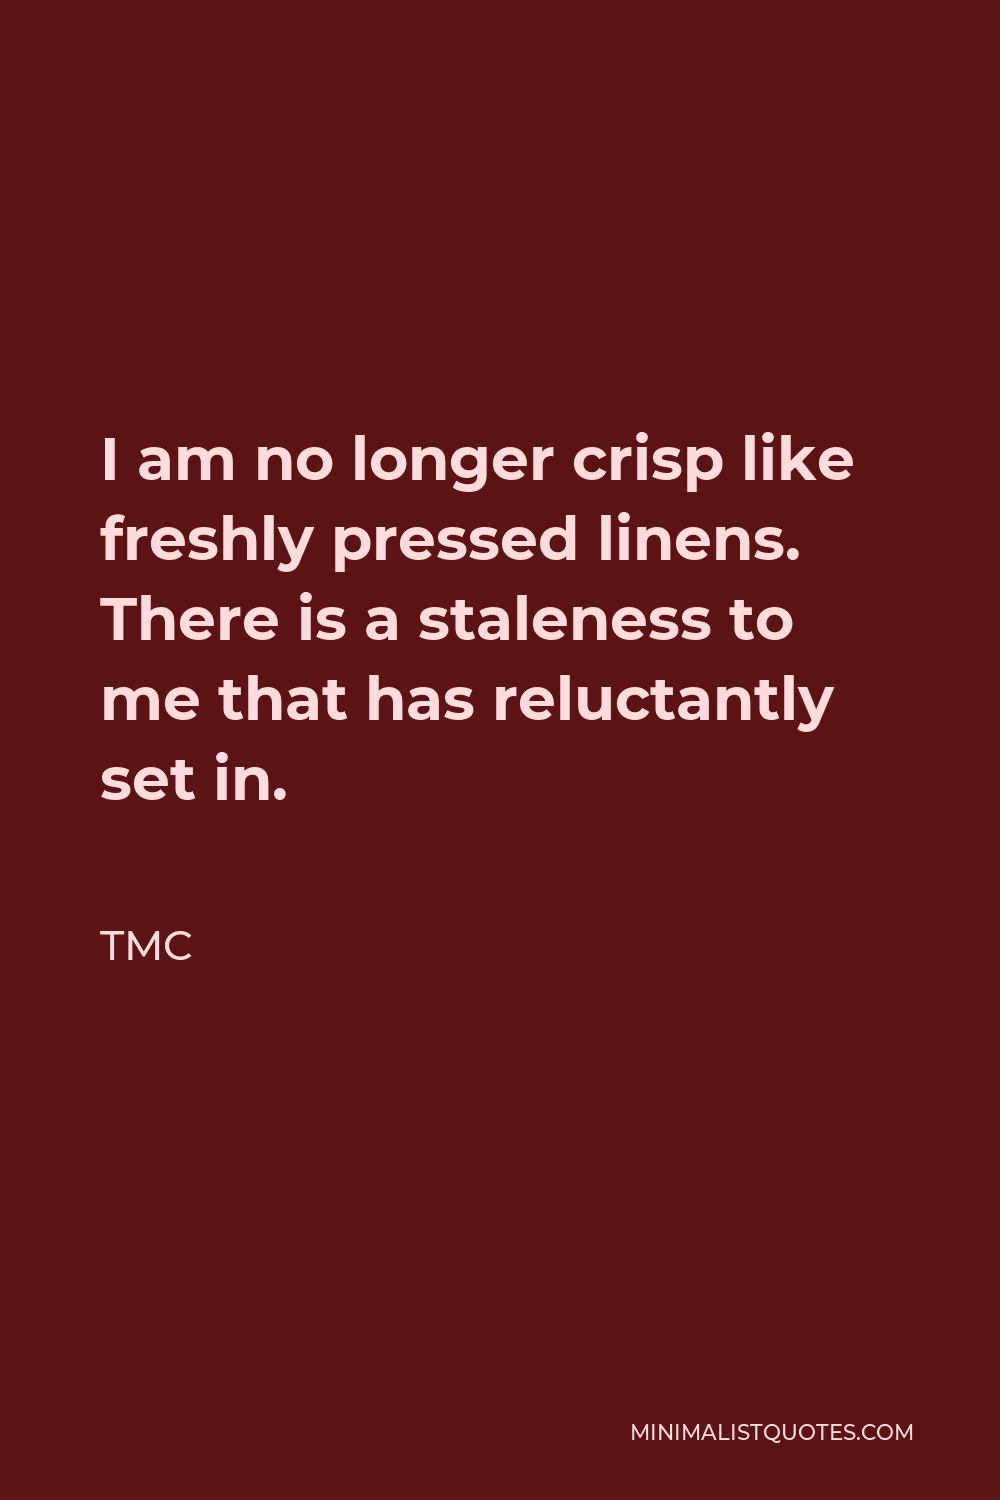 TMC Quote - I am no longer crisp like freshly pressed linens. There is a staleness to me that has reluctantly set in.